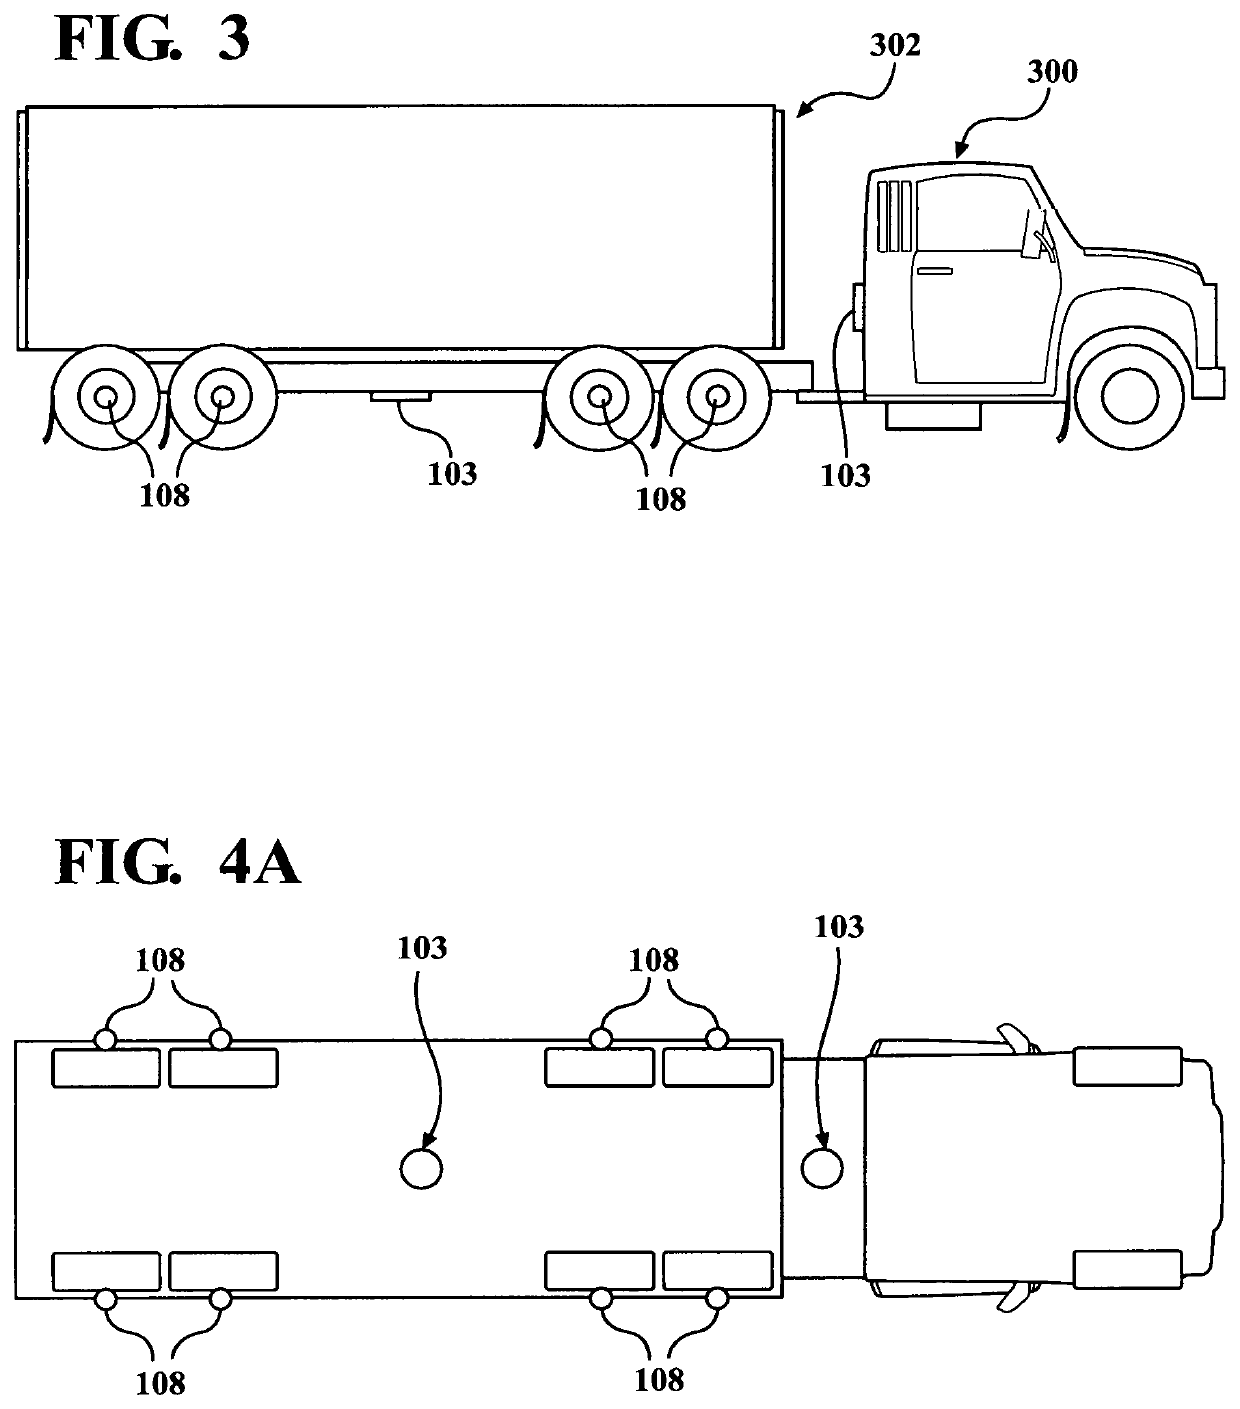 Apparatus and method for vehicular monitoring, analysis, and control of wheel end systems